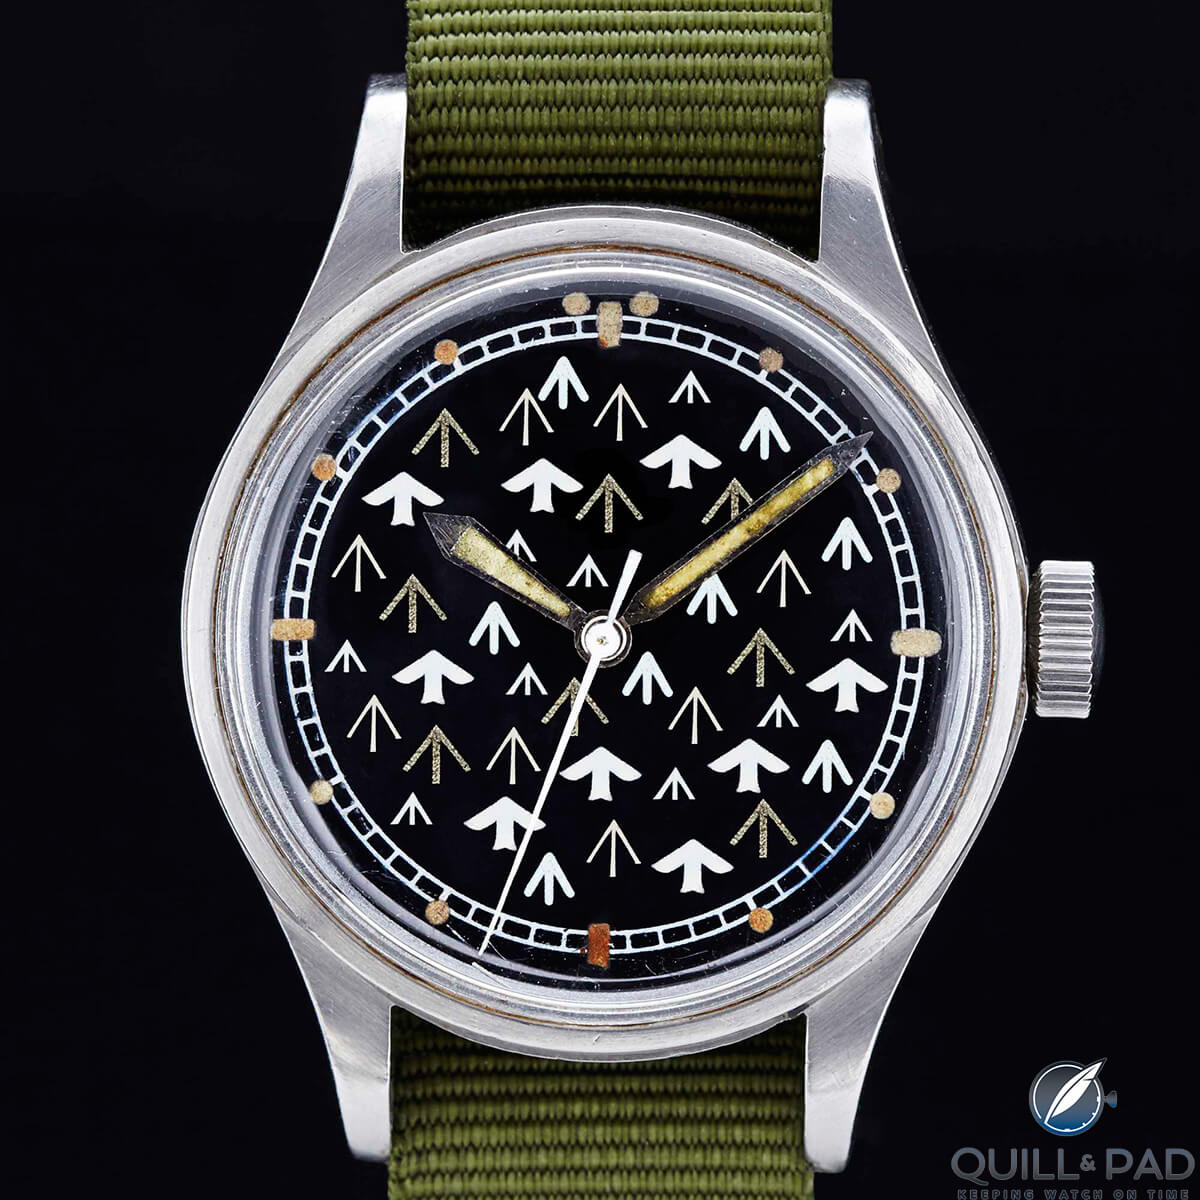 Atom Moore’s photo of the Omega Fat Arrow military watch from the NAWCC exhibition ‘Watch Portraits’